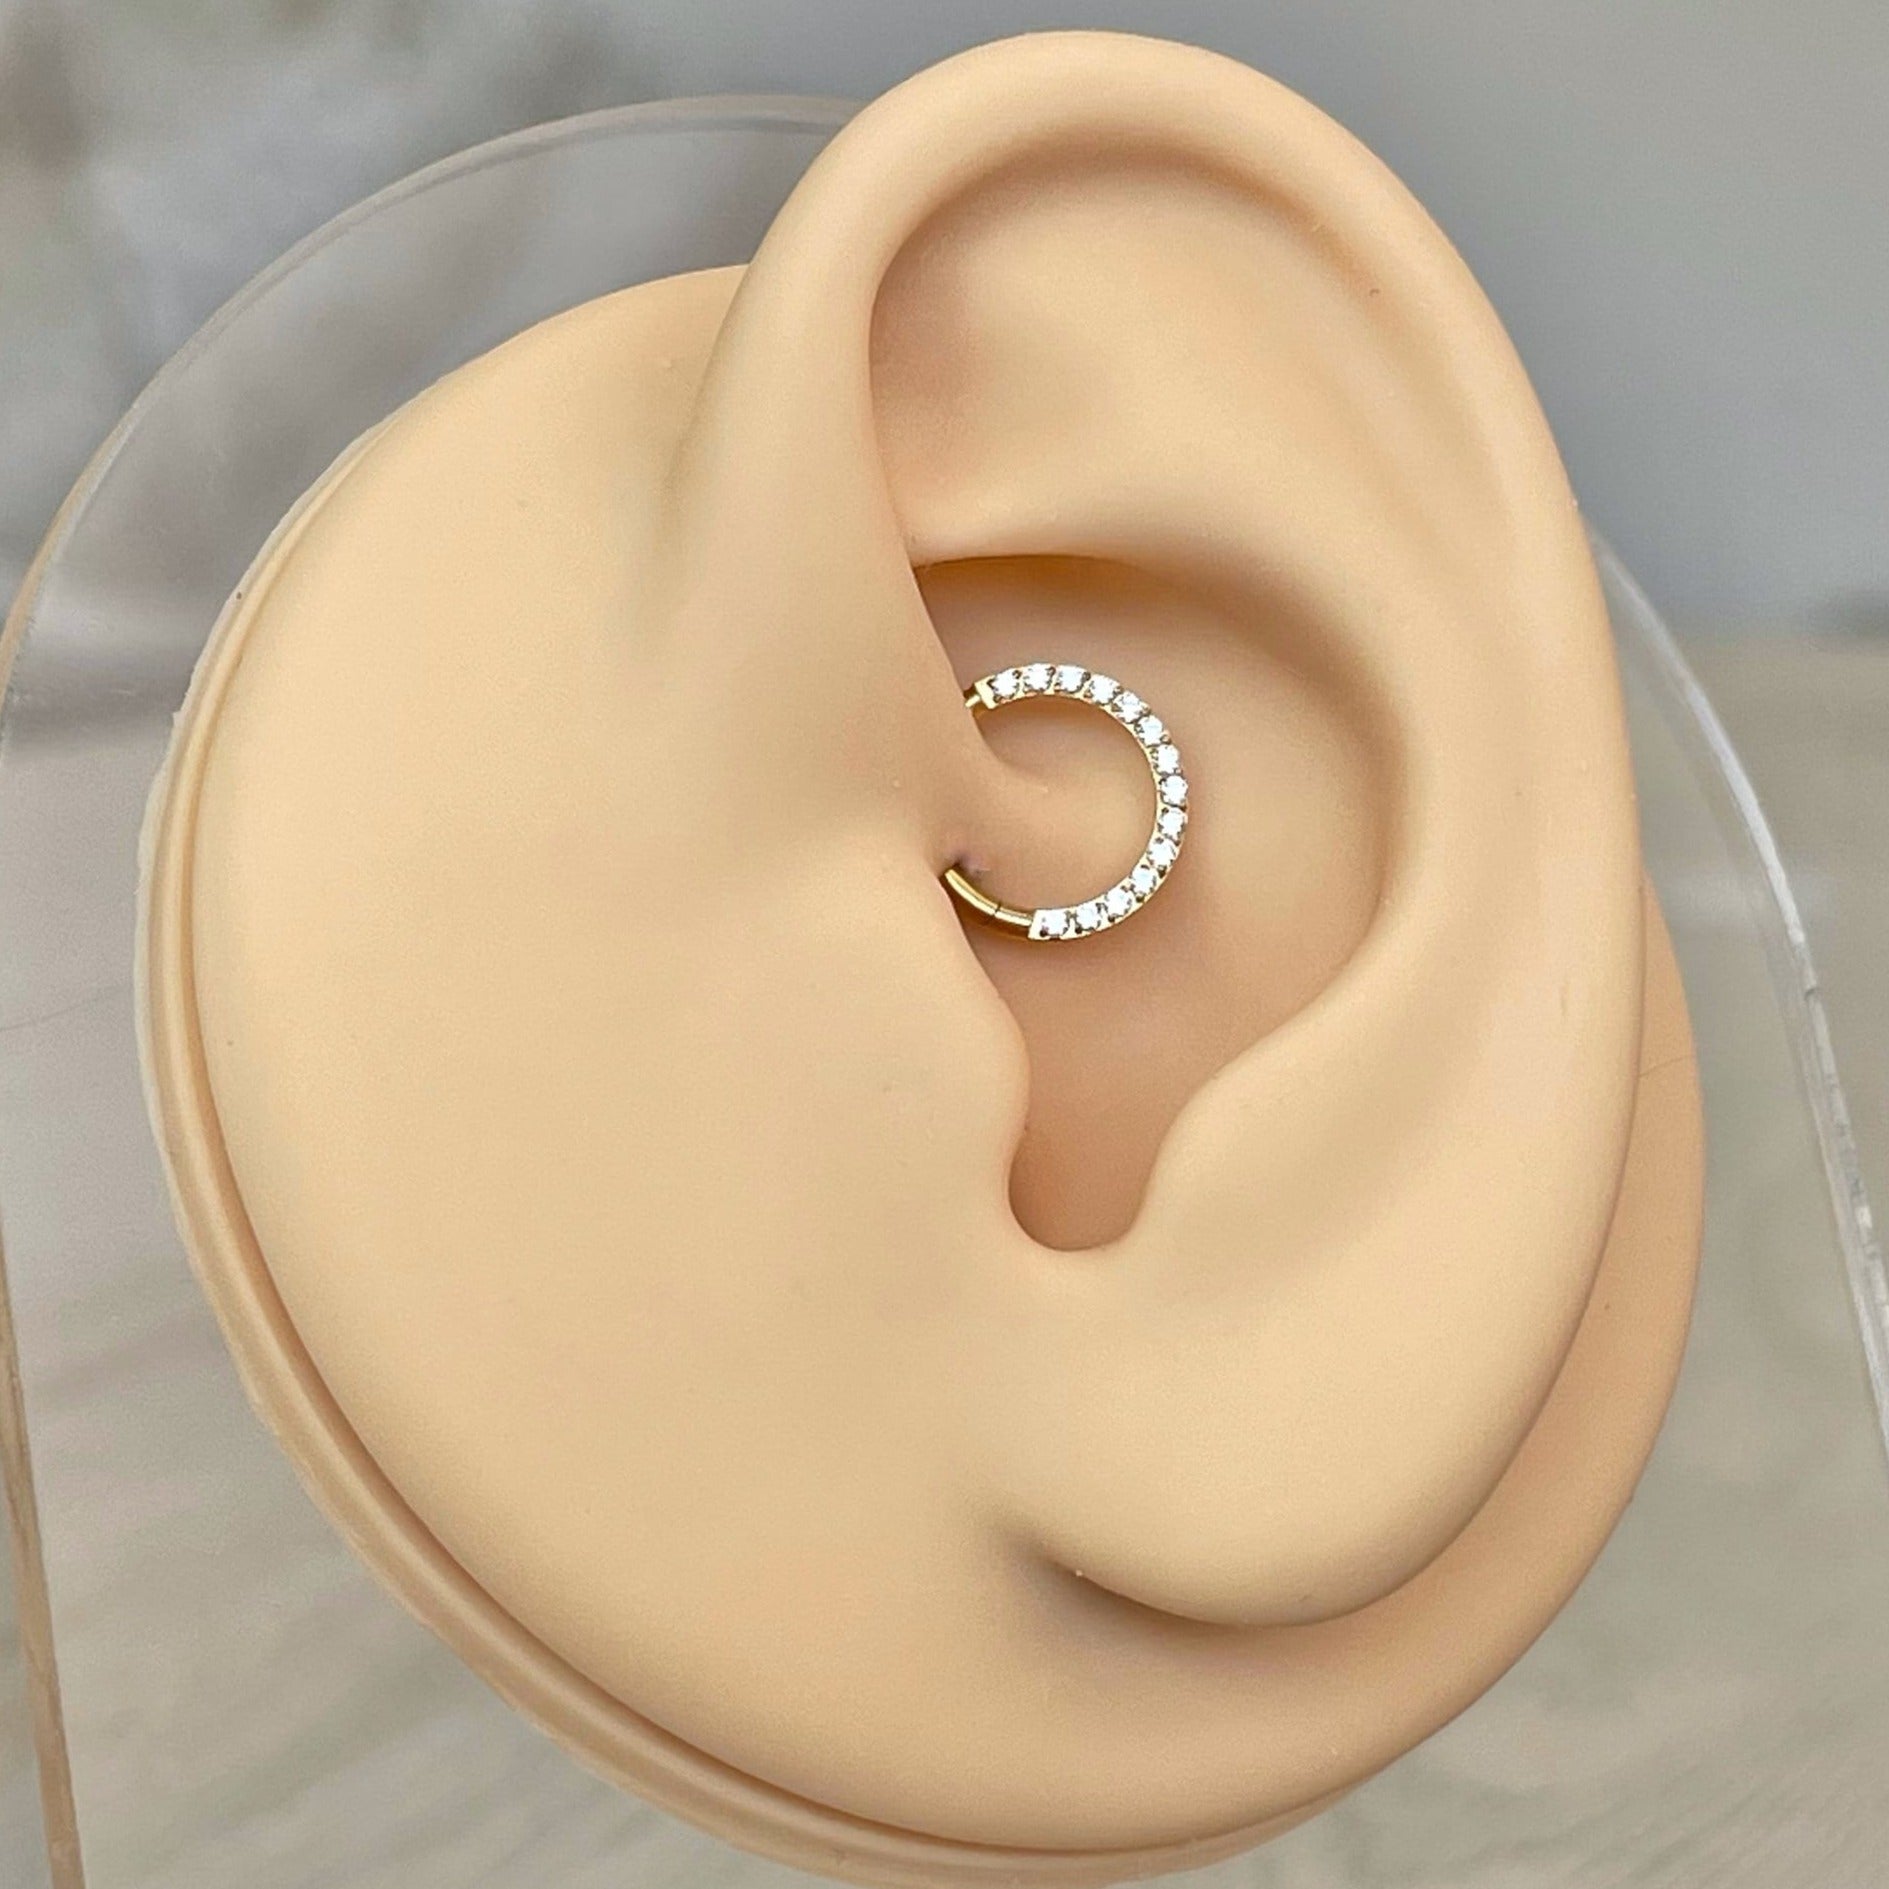 Titanium Daith Earring (14G, 16G, or 18G | 6mm, 8mm, or 10mm | Titanium | Silver, Gold, Rose Gold, or Black)